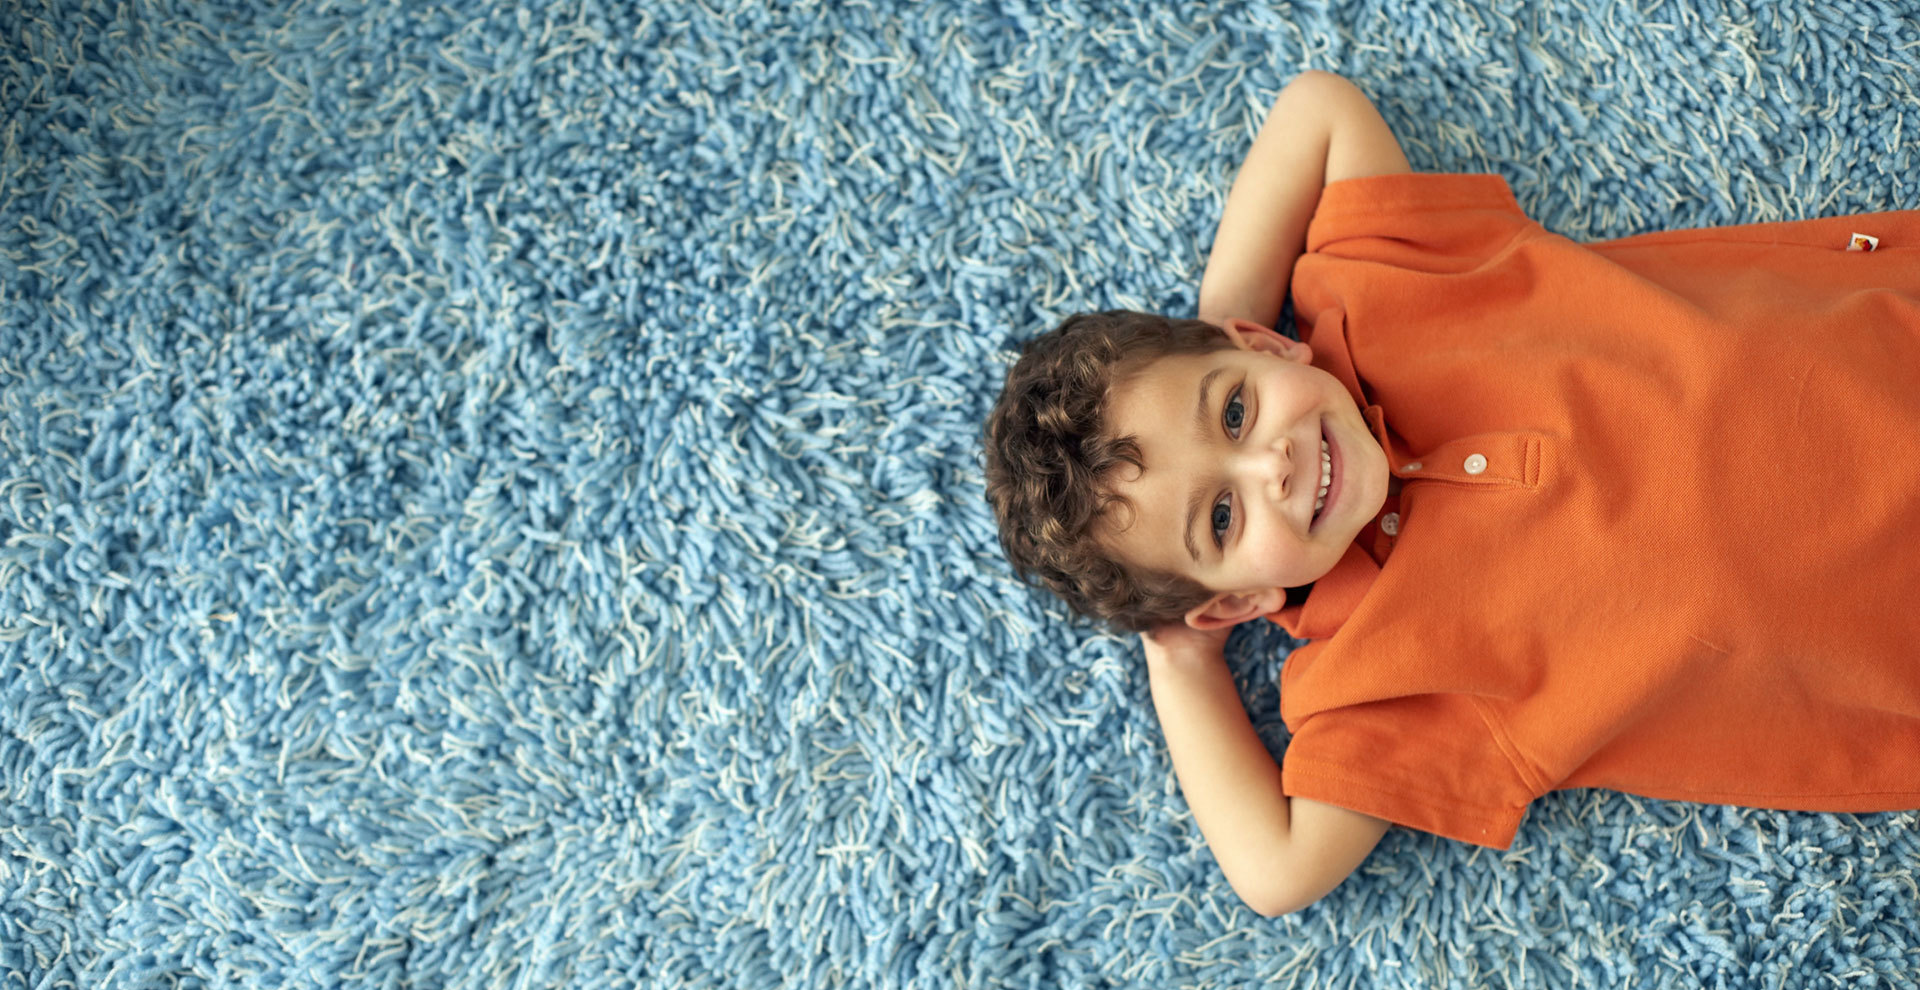 Young Boy Laying on Blue Carpet